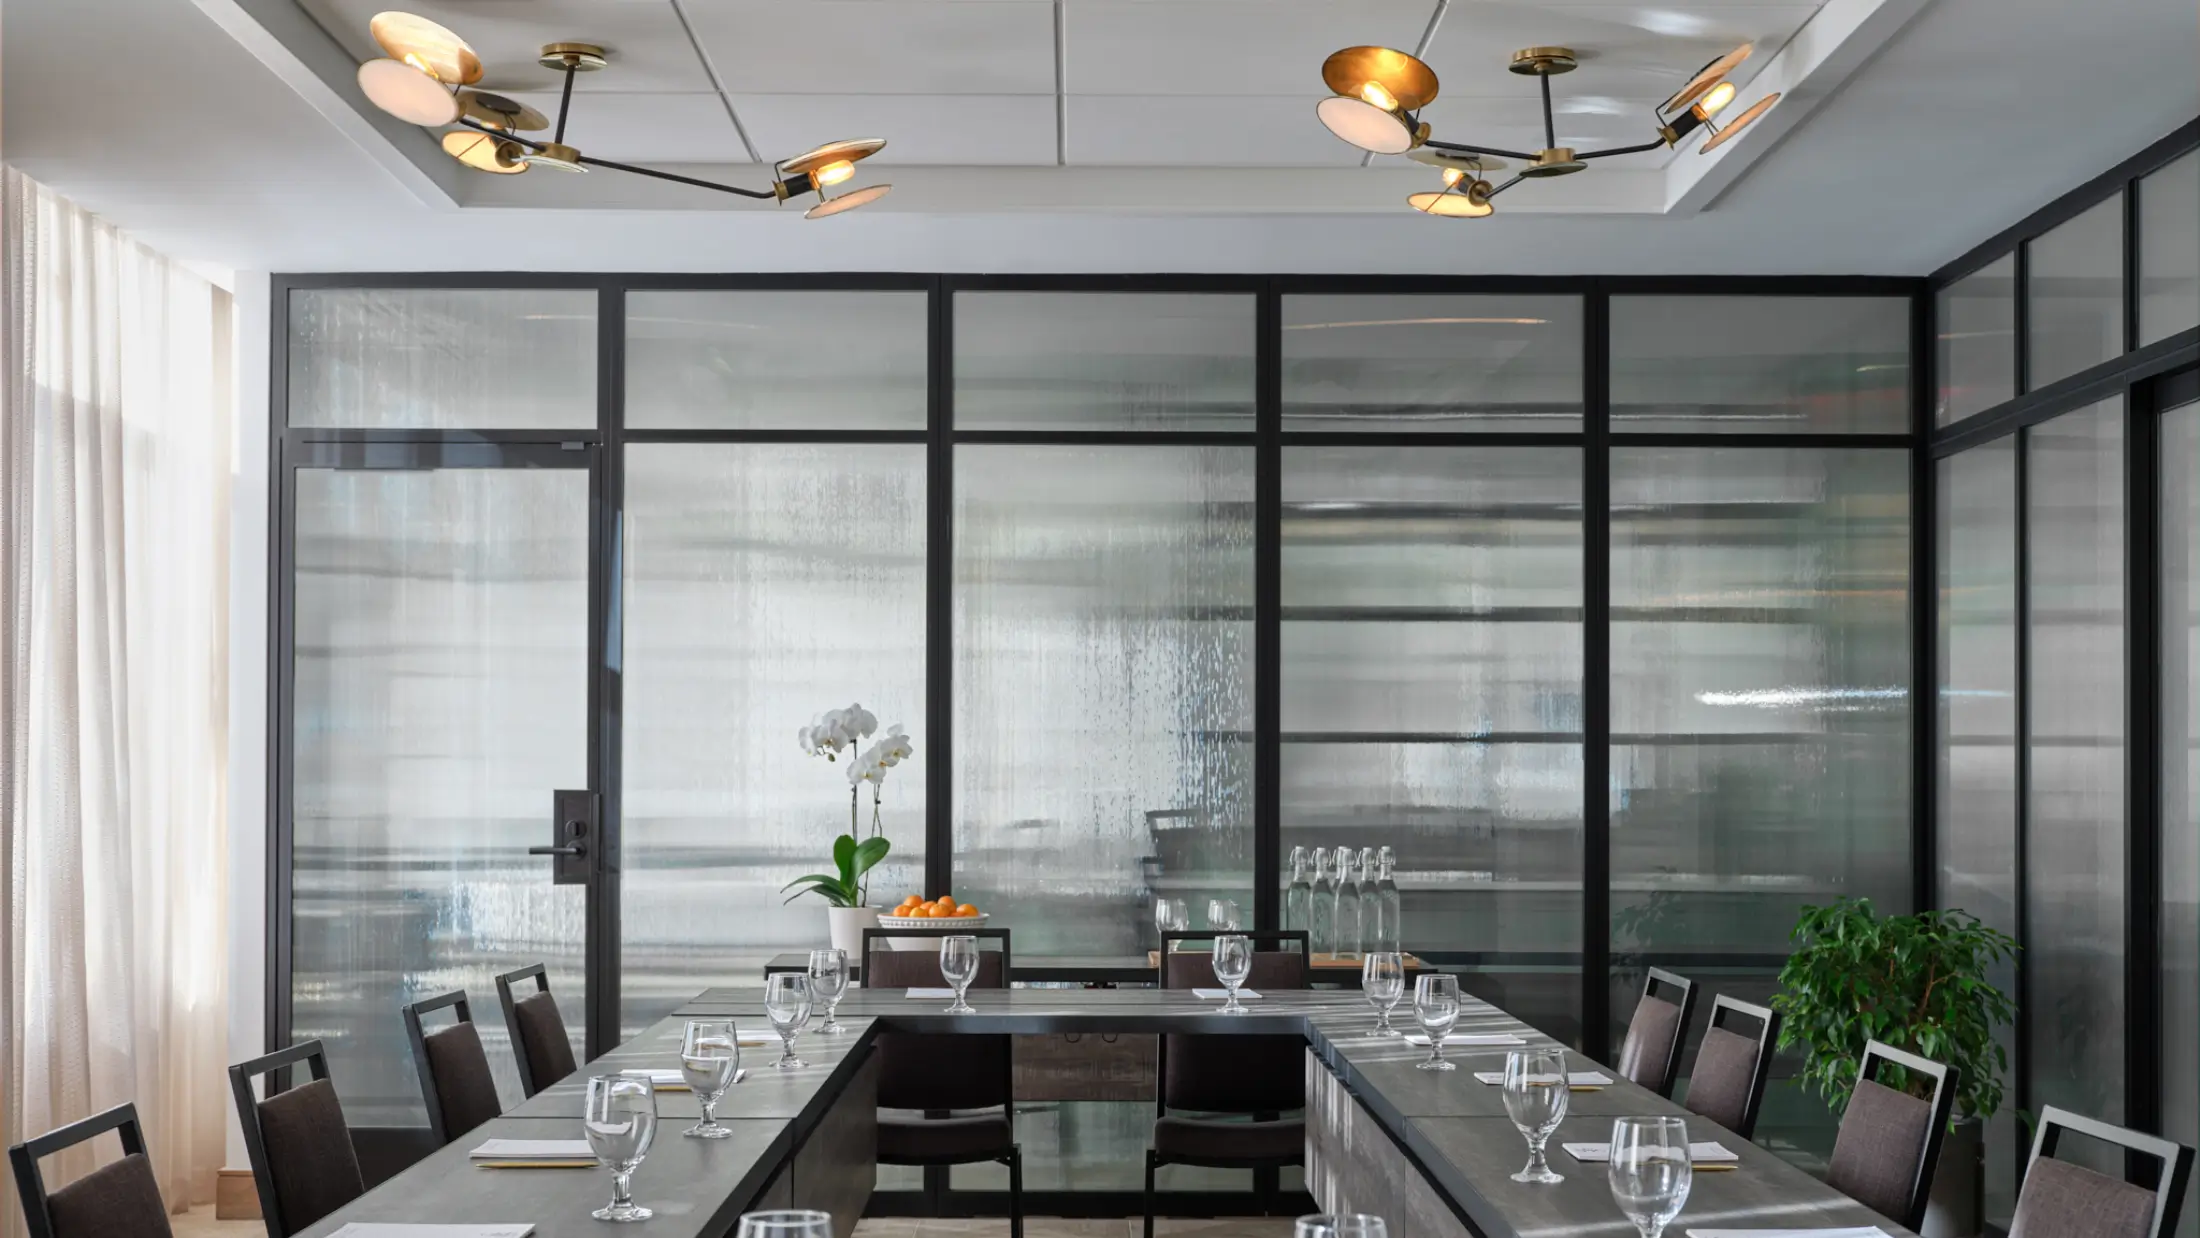 Well-lit, glass-enclosed meeting space at Six South St Hotel in Hanover, New Hampshire.